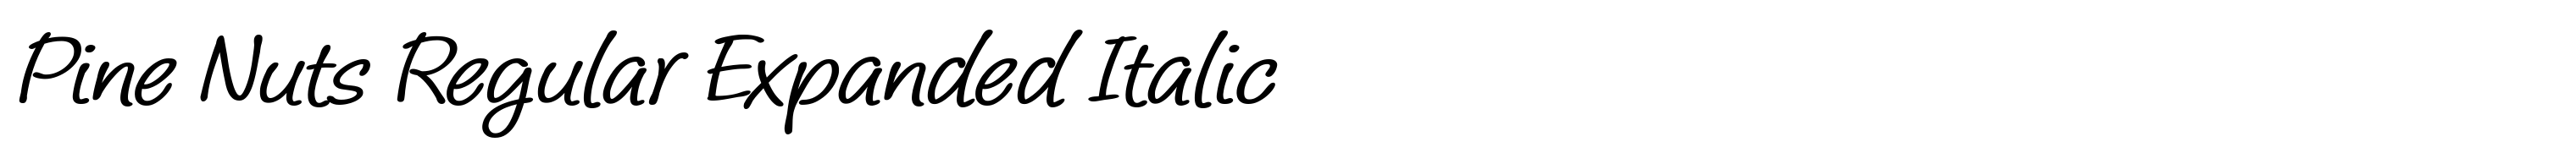 Pine Nuts Regular Expanded Italic